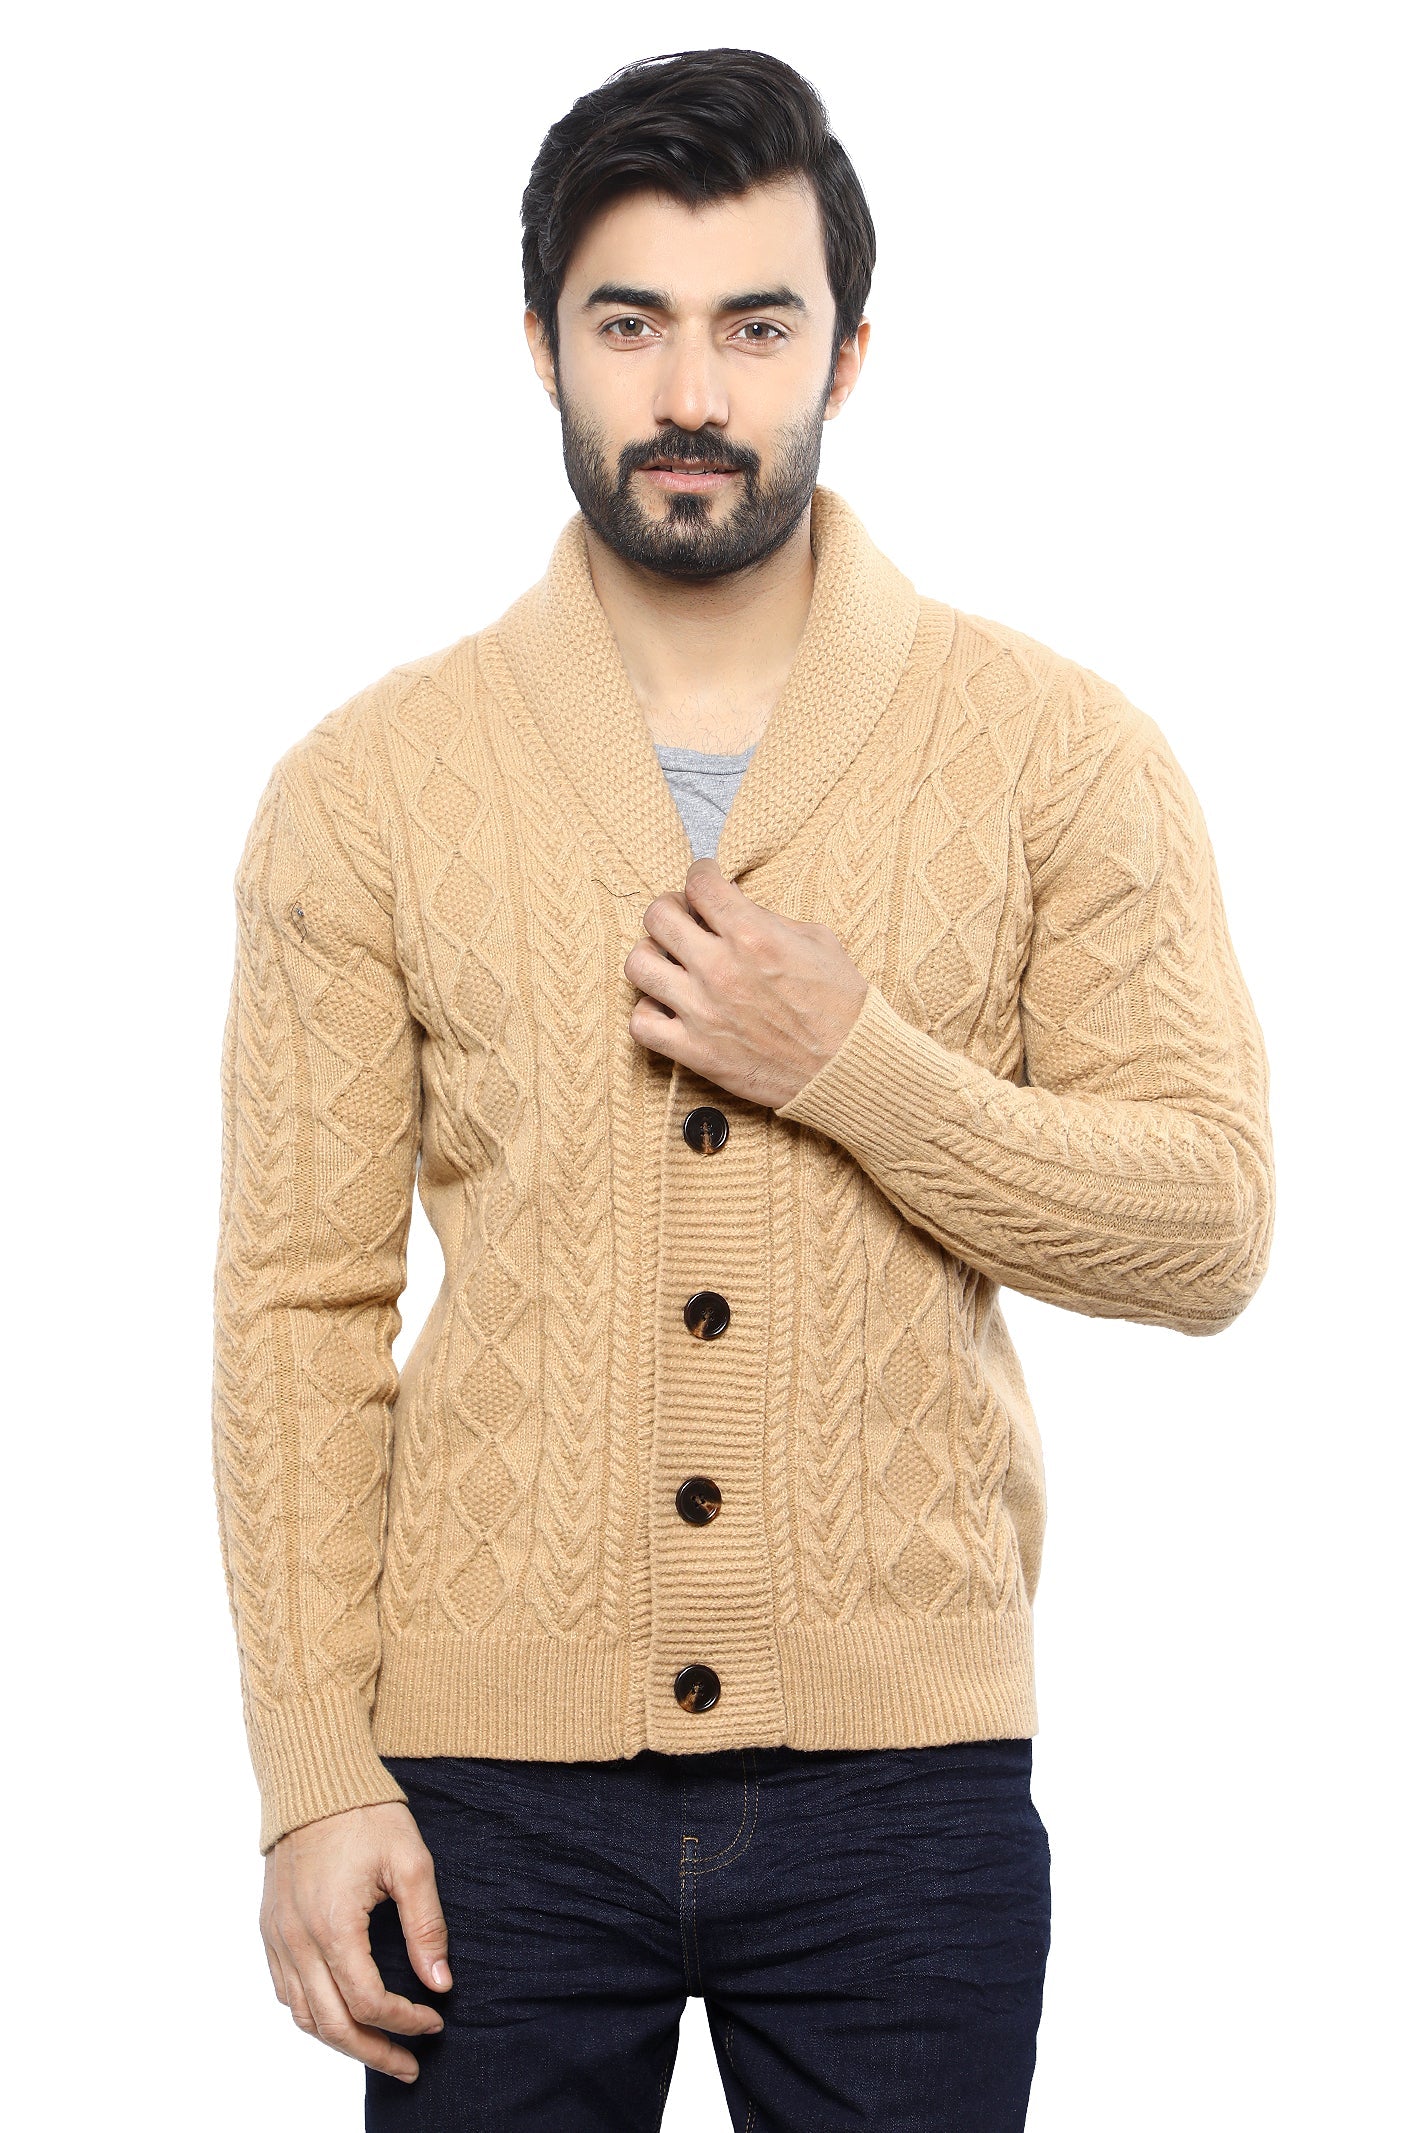 Gents Sweater SKU: SA596-FAWN - Diners